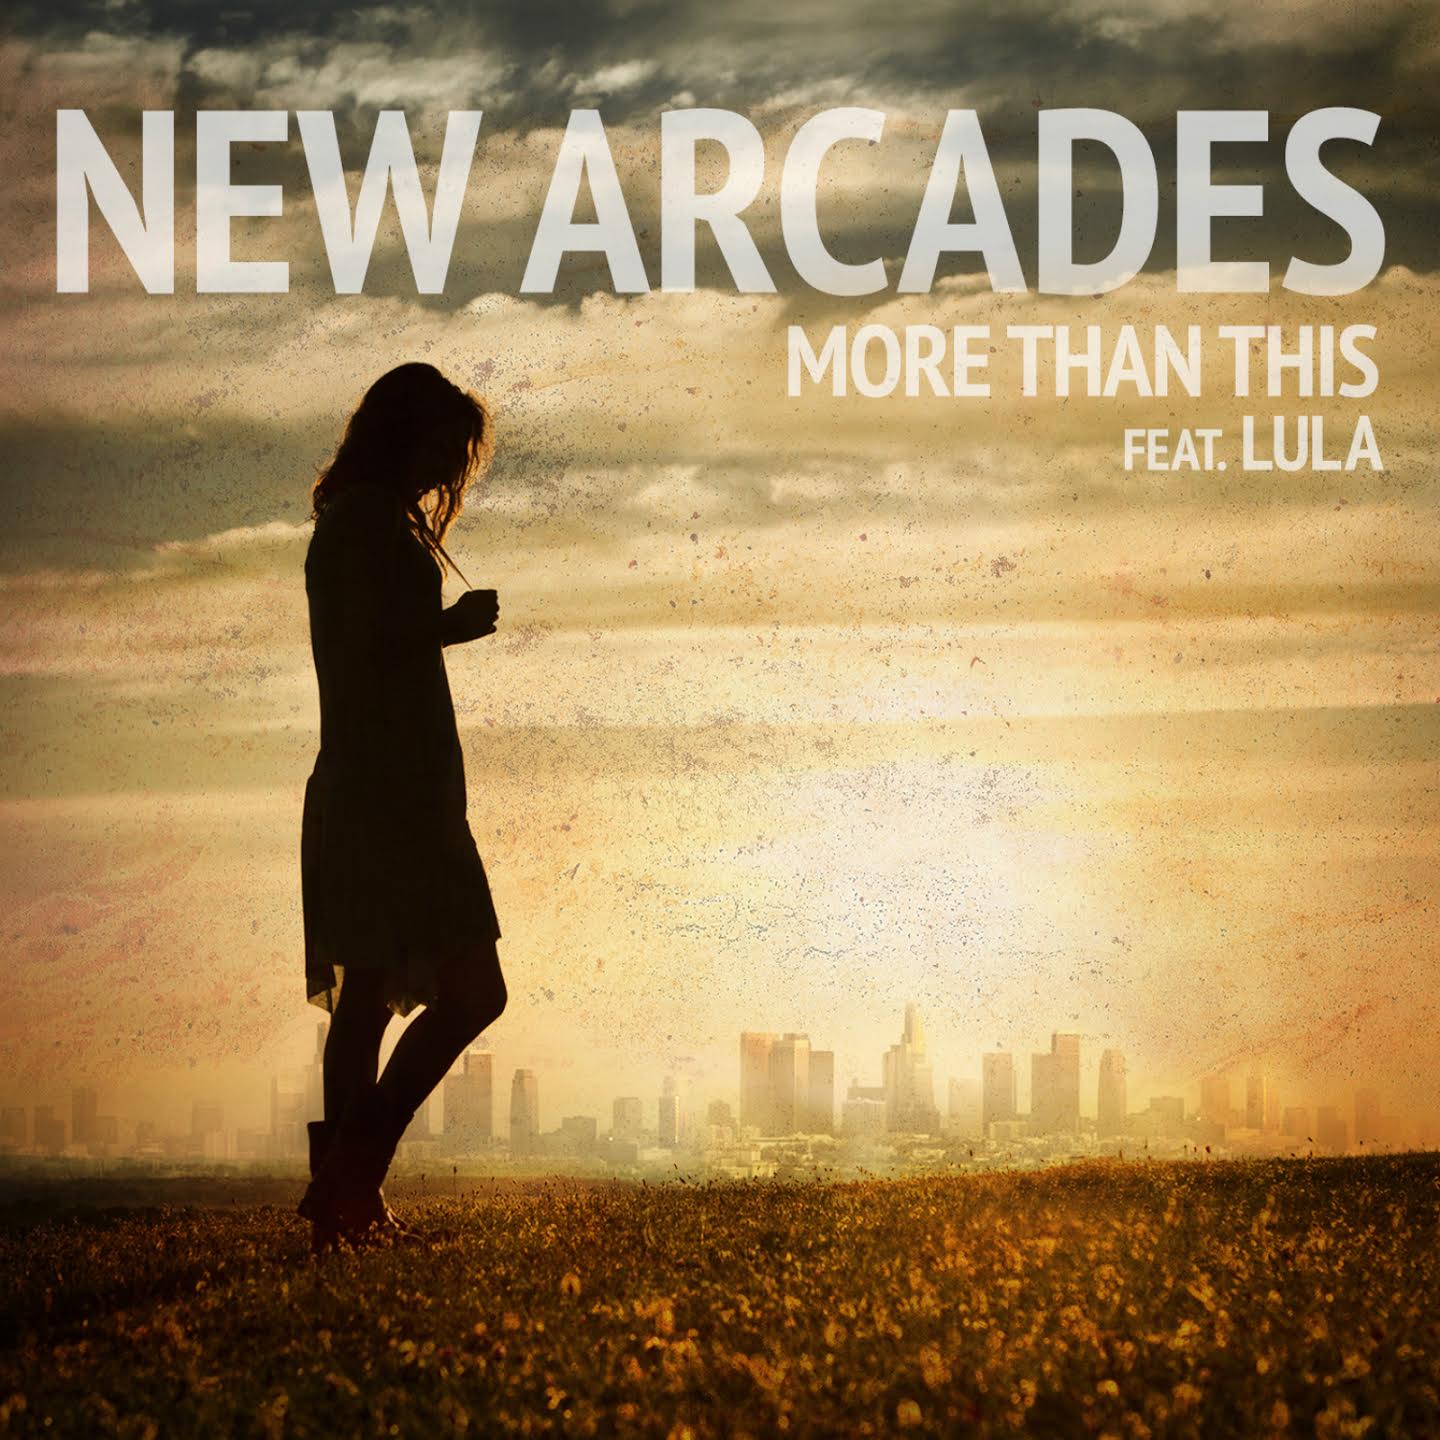 New Arcades – “More Than This